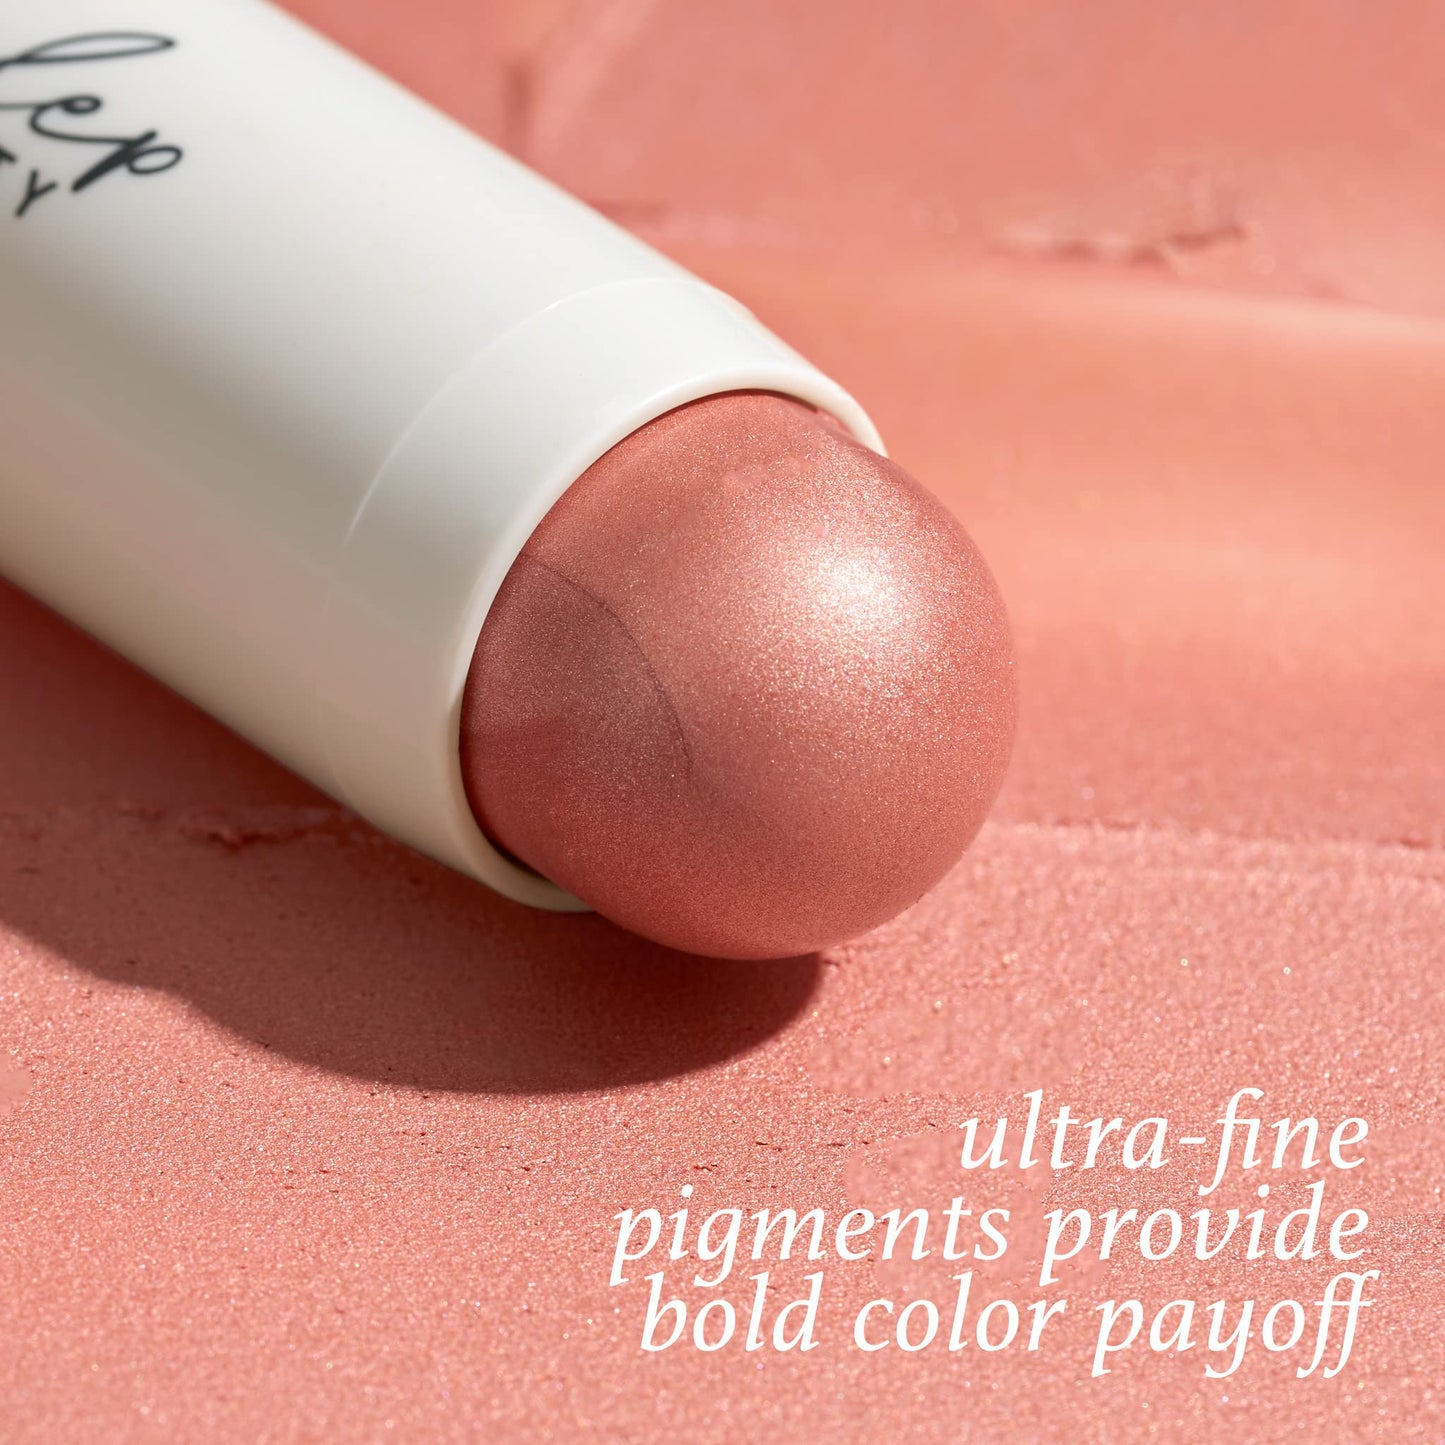 Julep Skip The Brush Cream to Powder Blush Stick - Rose Gold - Blendable and Buildable Color - 2-in-1 Blush and Lip Makeup Stick